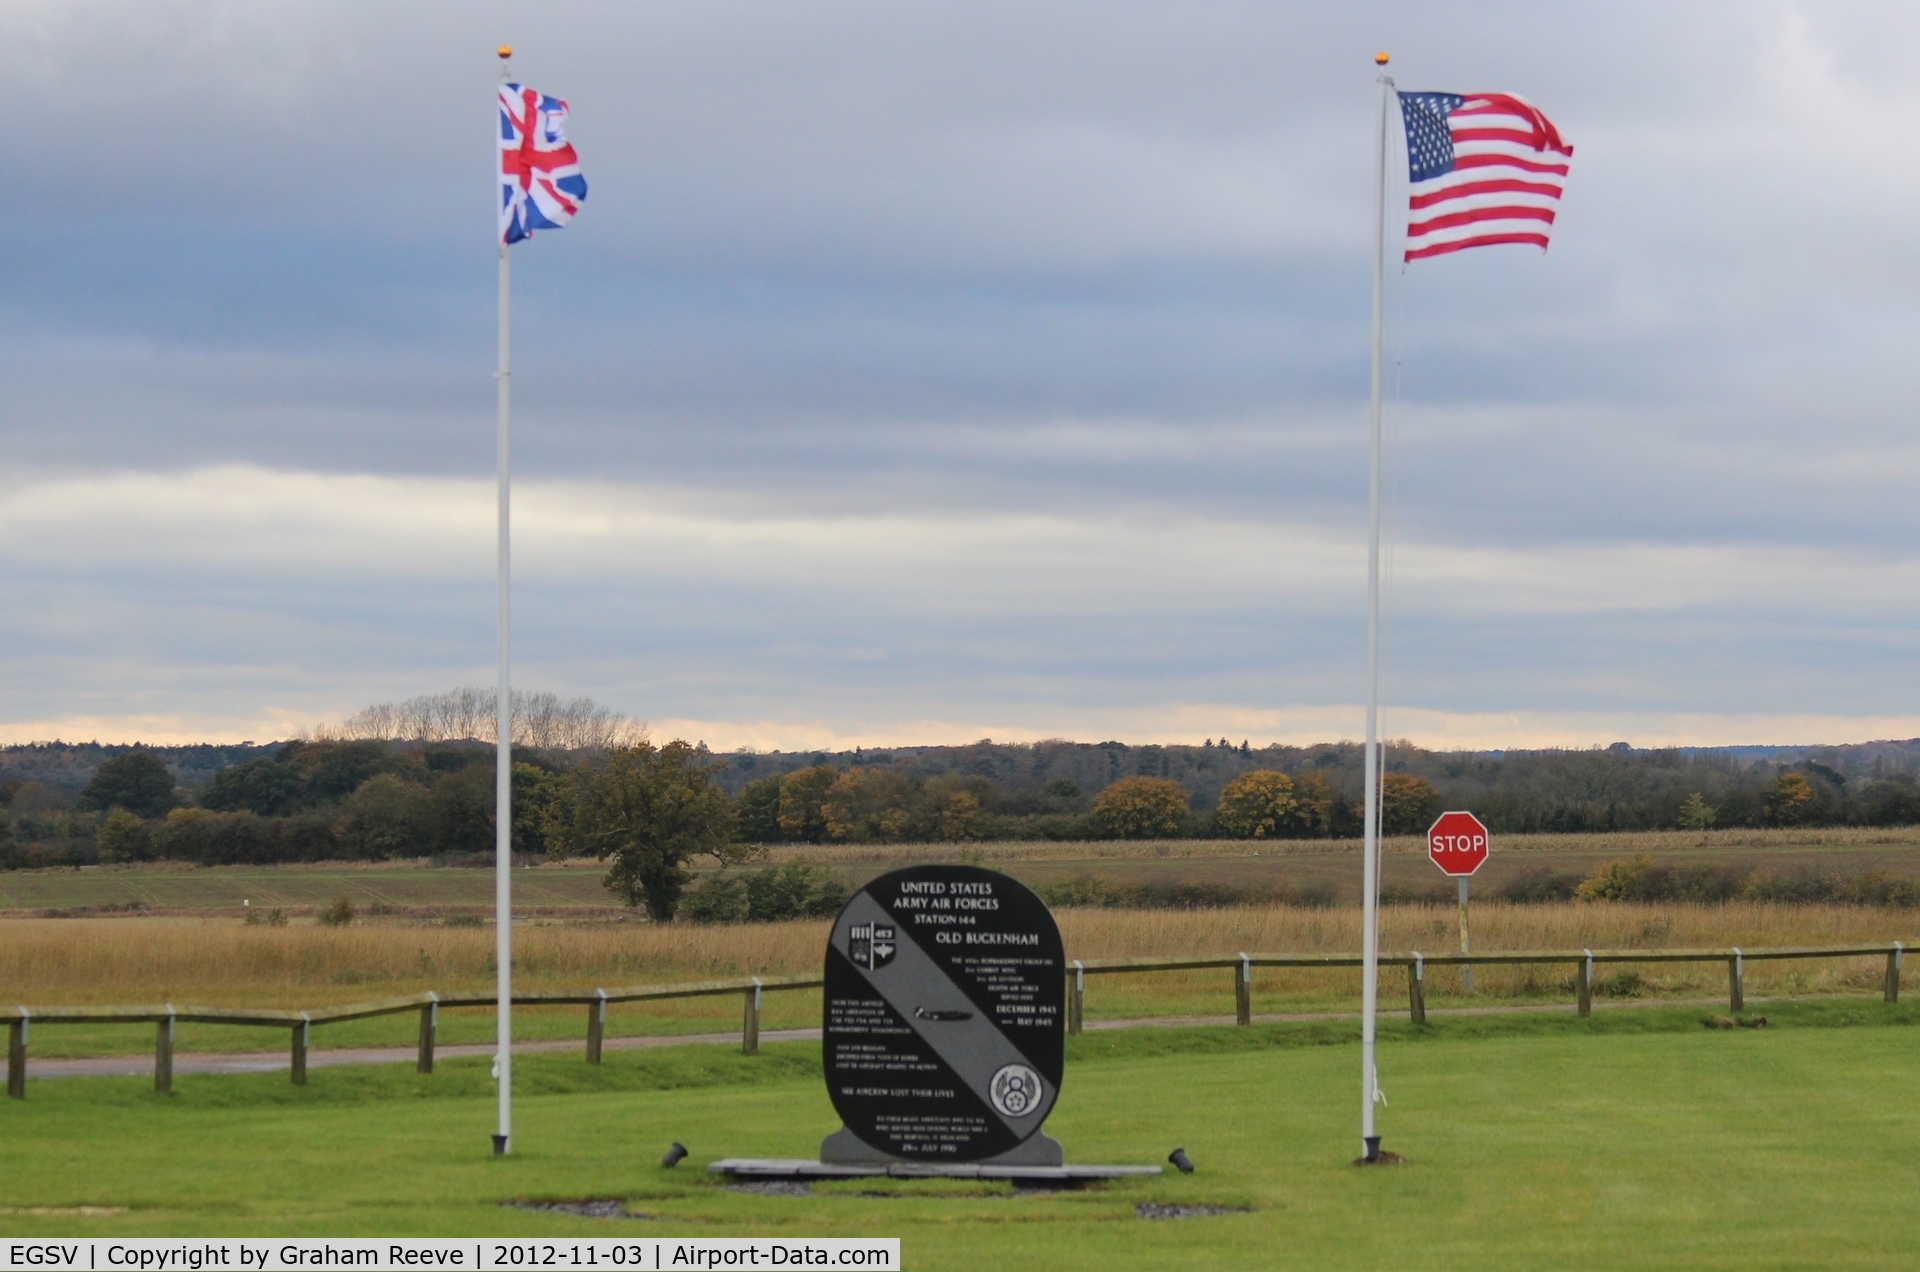 Old Buckenham Airport, Norwich, England United Kingdom (EGSV) - The War Memorial to those of the 8th USAAF, after being moved to it's new location at Old Buckenham.